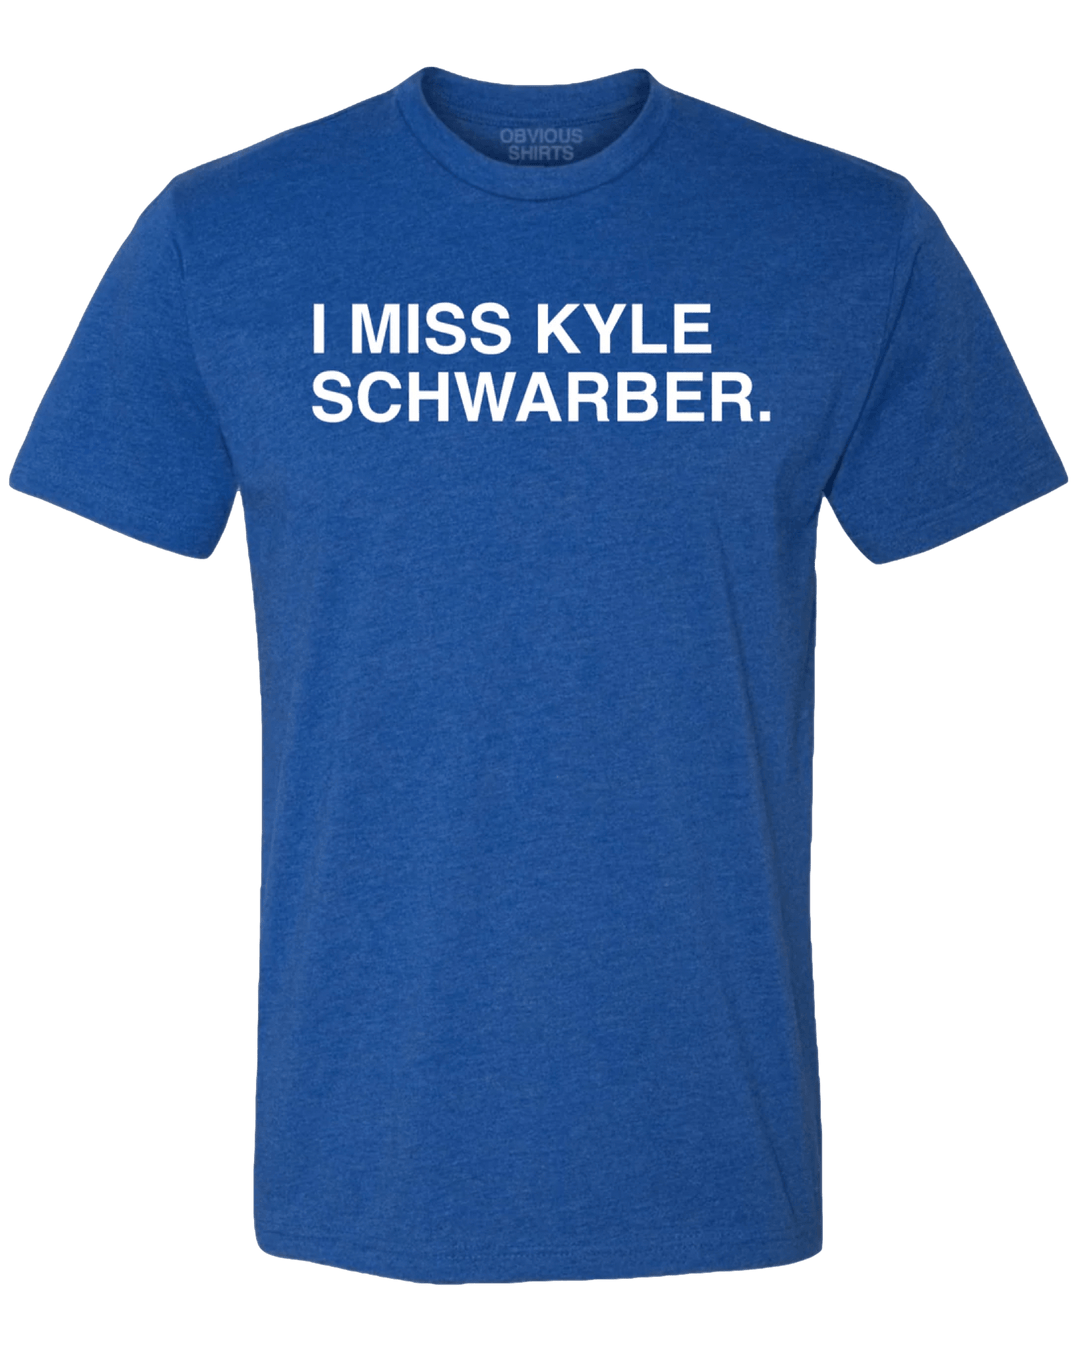 I MISS KYLE SCHWARBER. - OBVIOUS SHIRTS